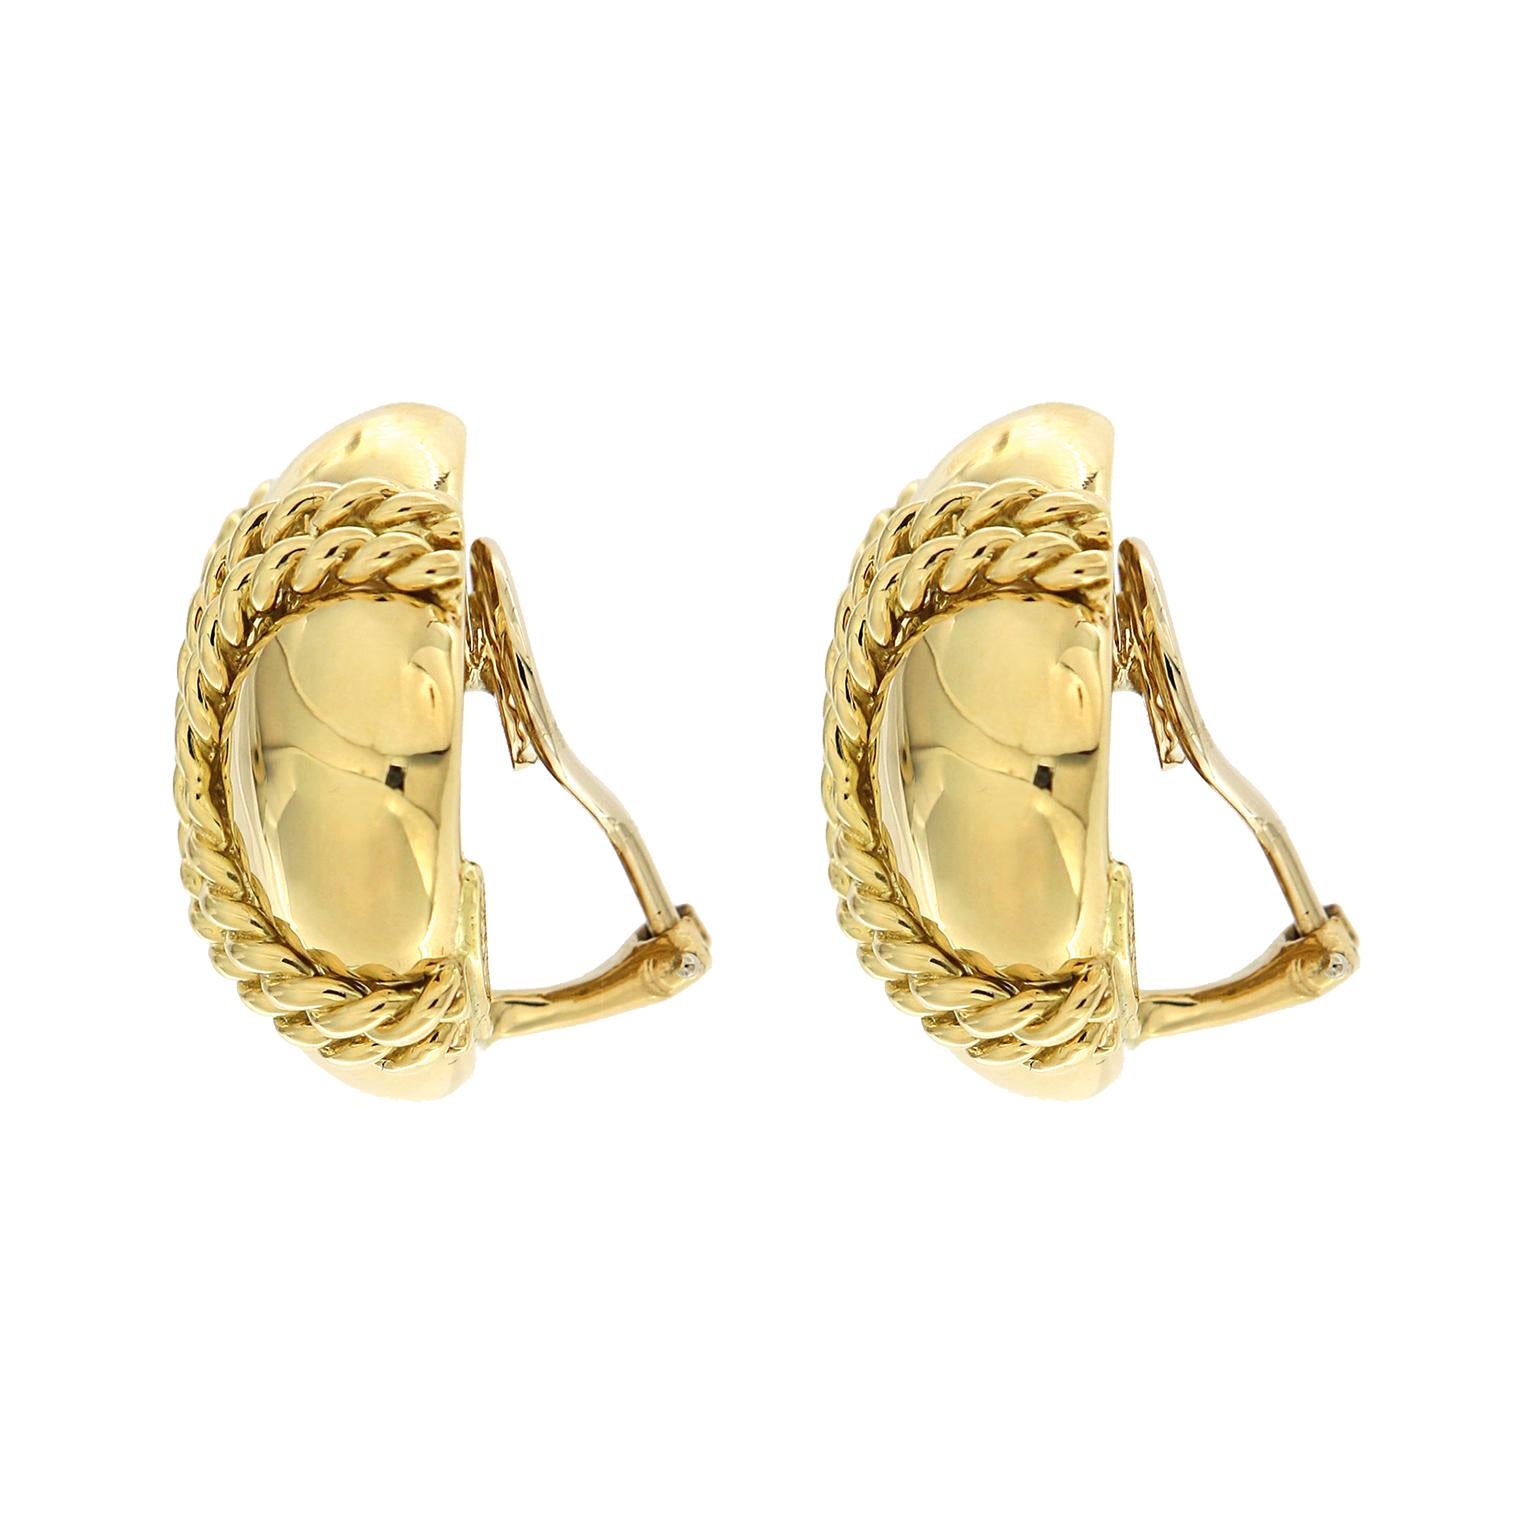 These diamond-shaped earrings created by Valentin Magro are all gold. The base is smooth polished 18k yellow gold. Double rows of twisted gold rope crisscross the fronts. Clip backs keep the earrings secure. 

Measurement detail - width 0.98 inches